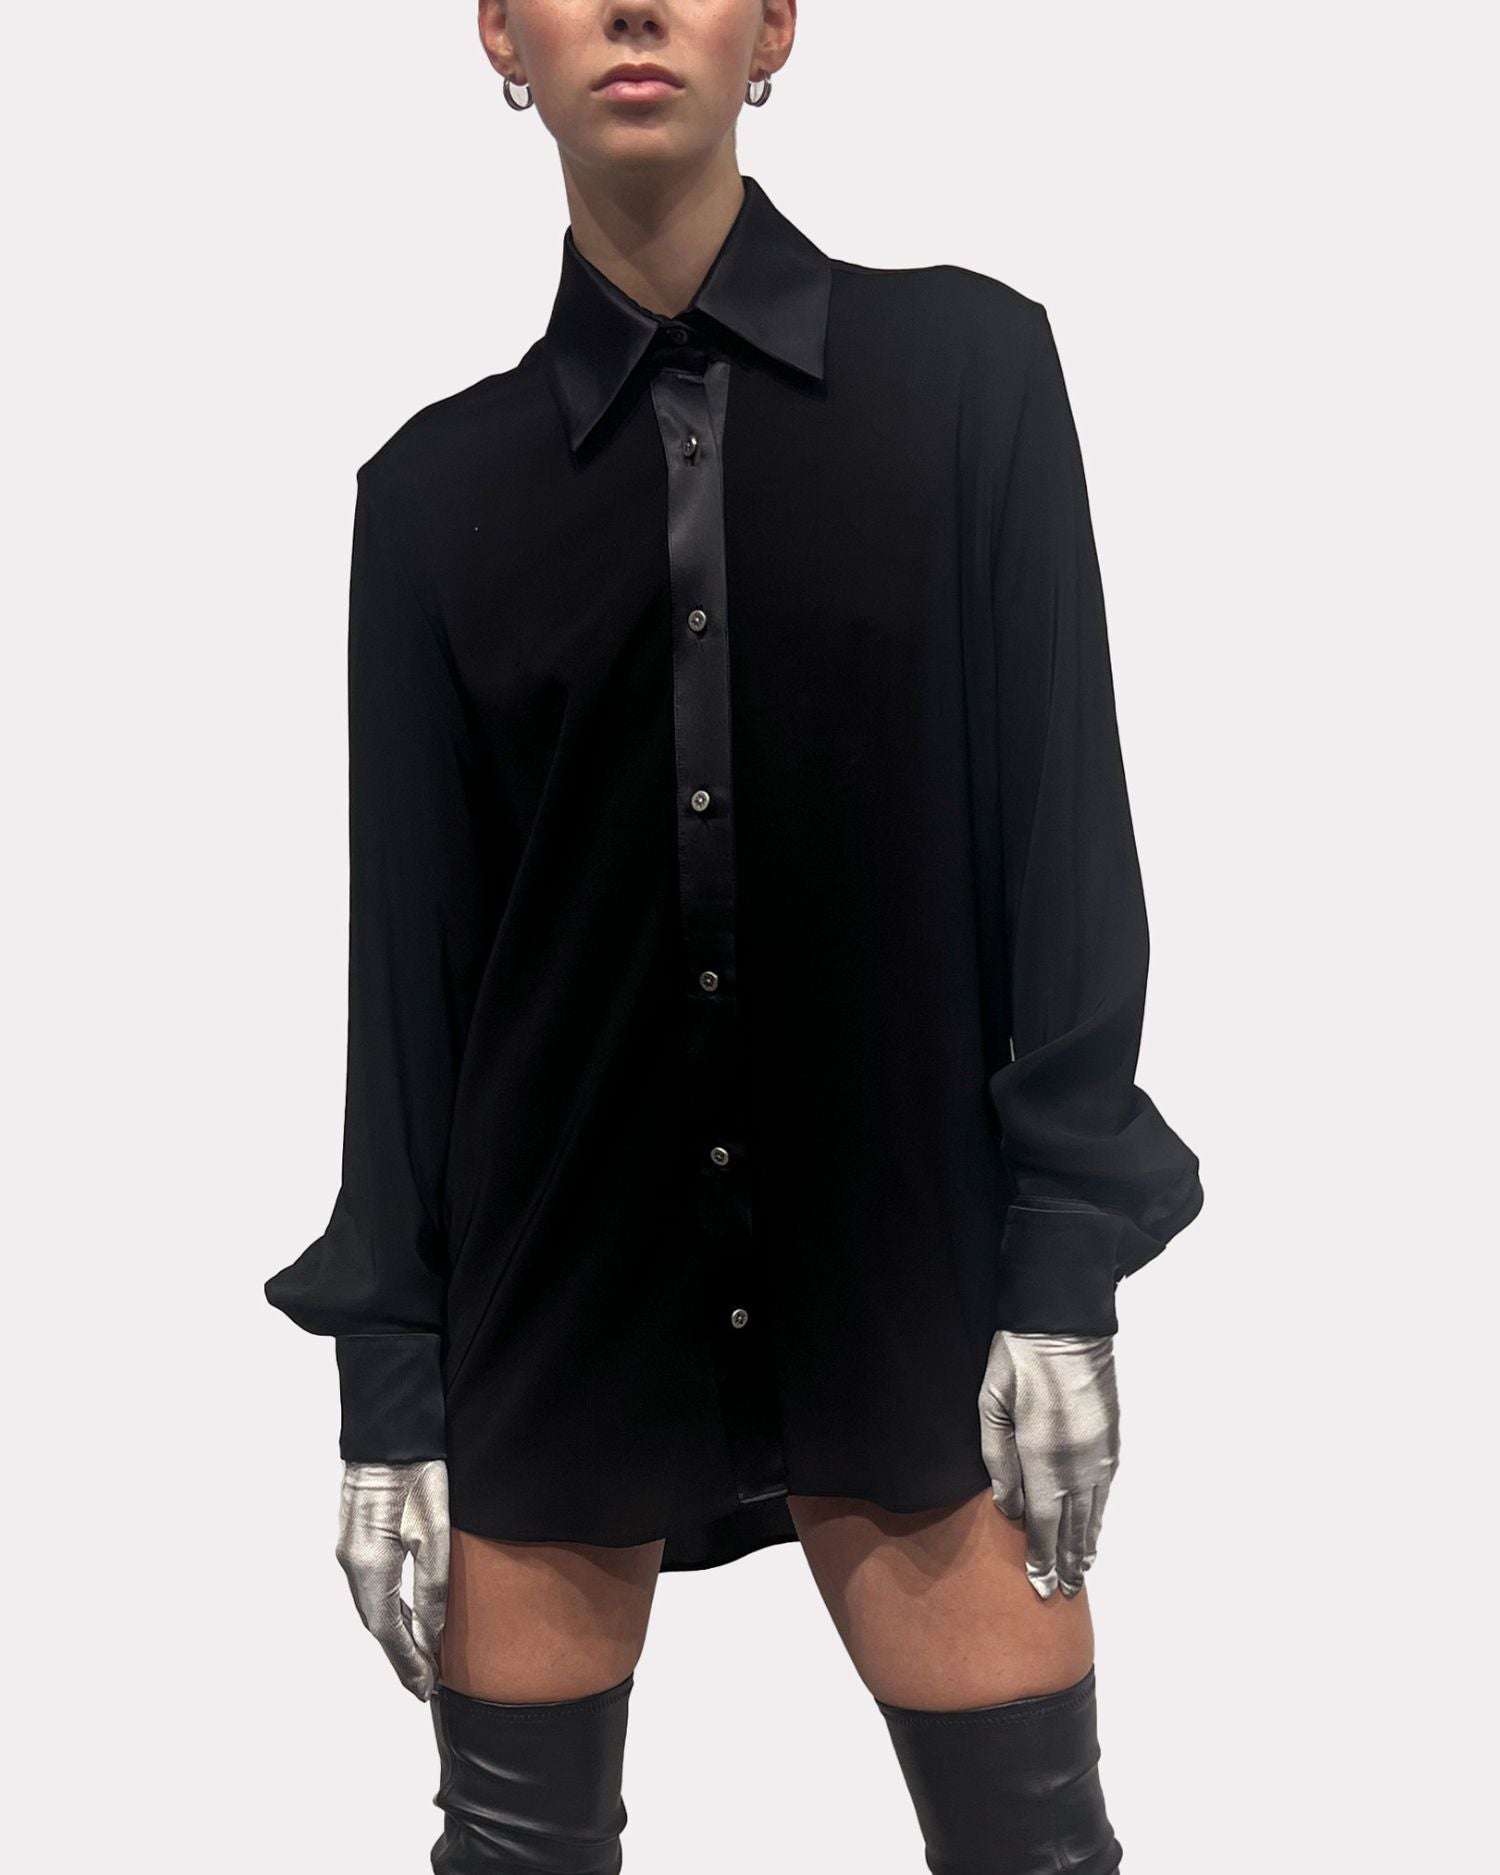 Shop John Richmond Shirt With Contrasting Fabrics And Wide Long Sleeves. Frontalt Fastener By Buttons. In Nero